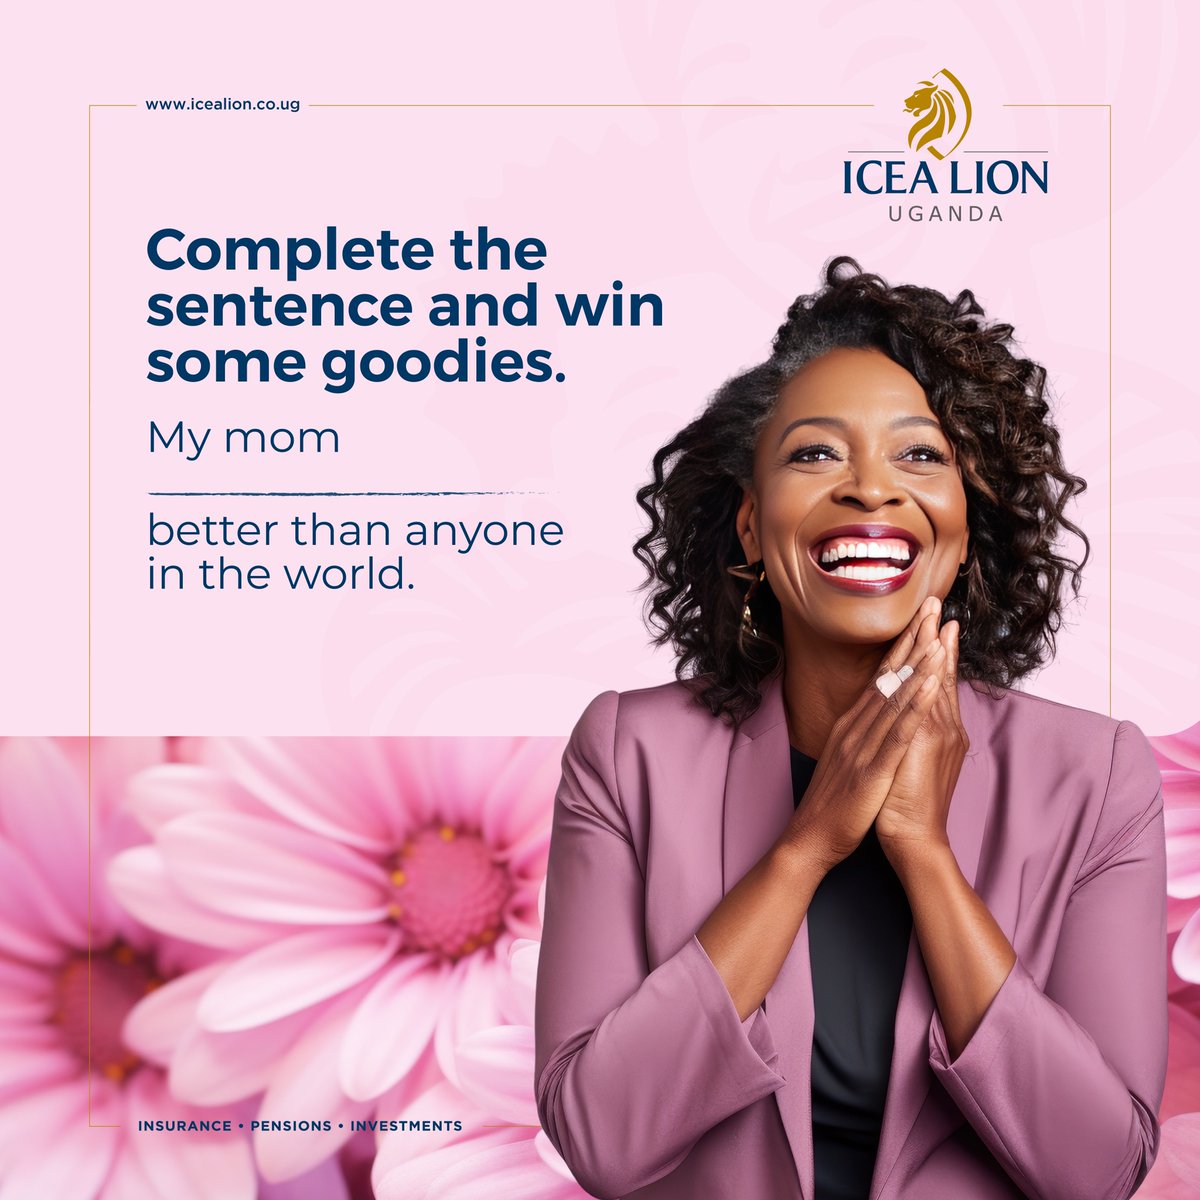 We all have that one thing that our moms do better than anyone else. Share it with us here as we celebrate our superheroes and have a chance to win! 😊❤️🧑 #ICEALionMothers #MothersDay